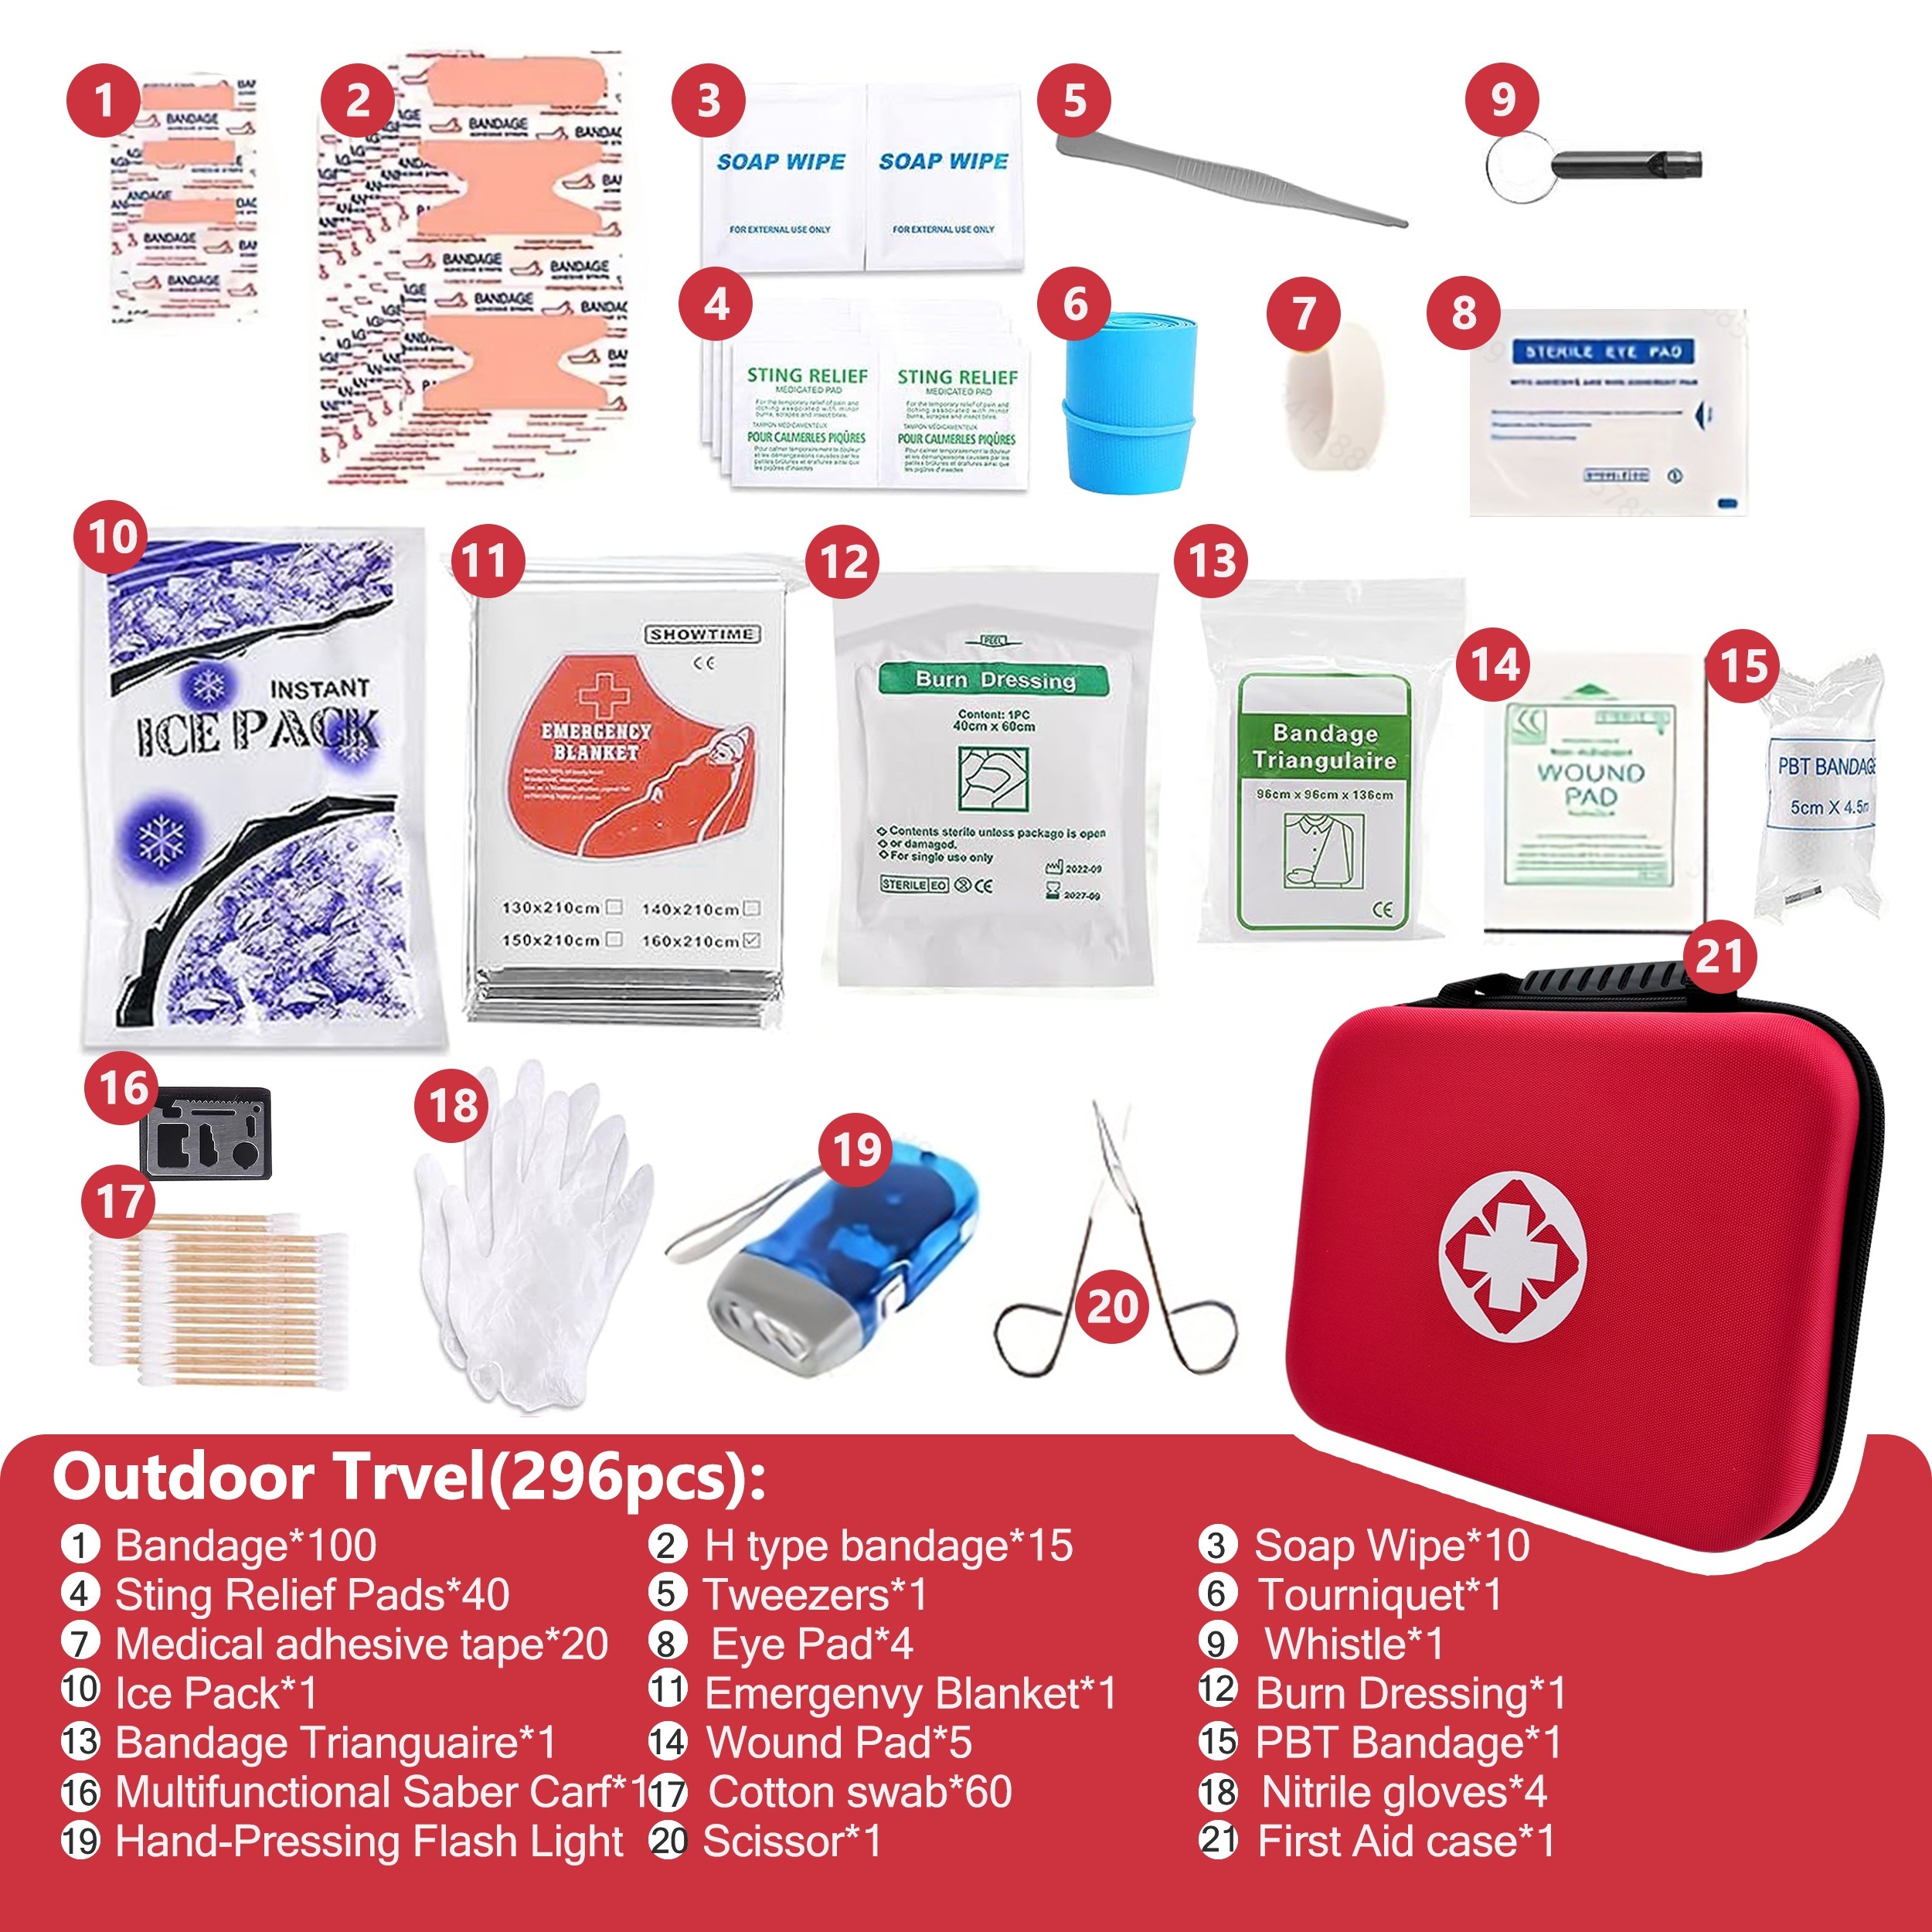 first aid kit contents list